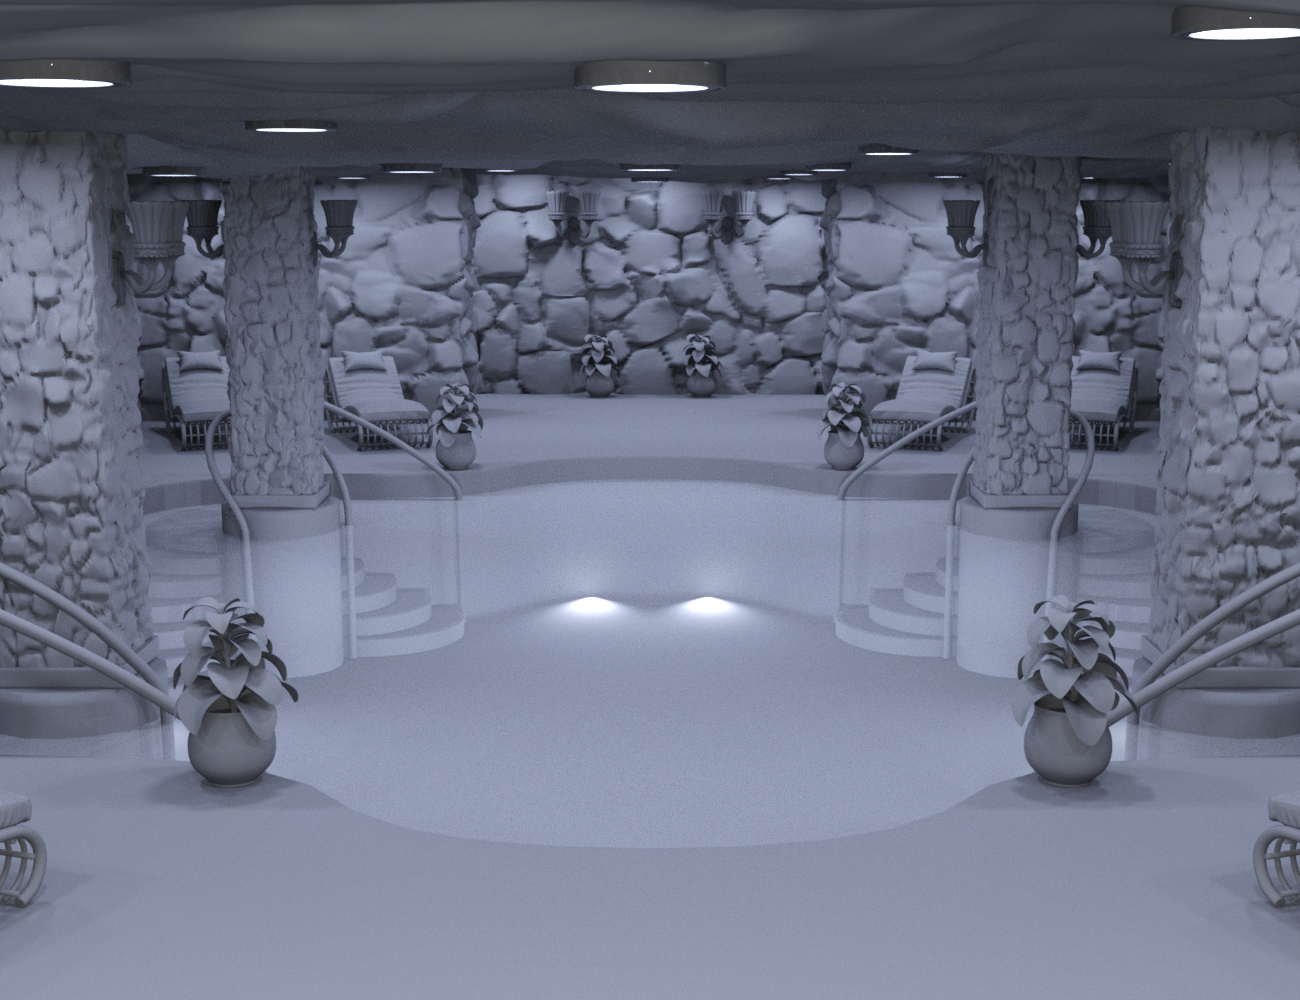 Subterranean Pool by: Charlie, 3D Models by Daz 3D